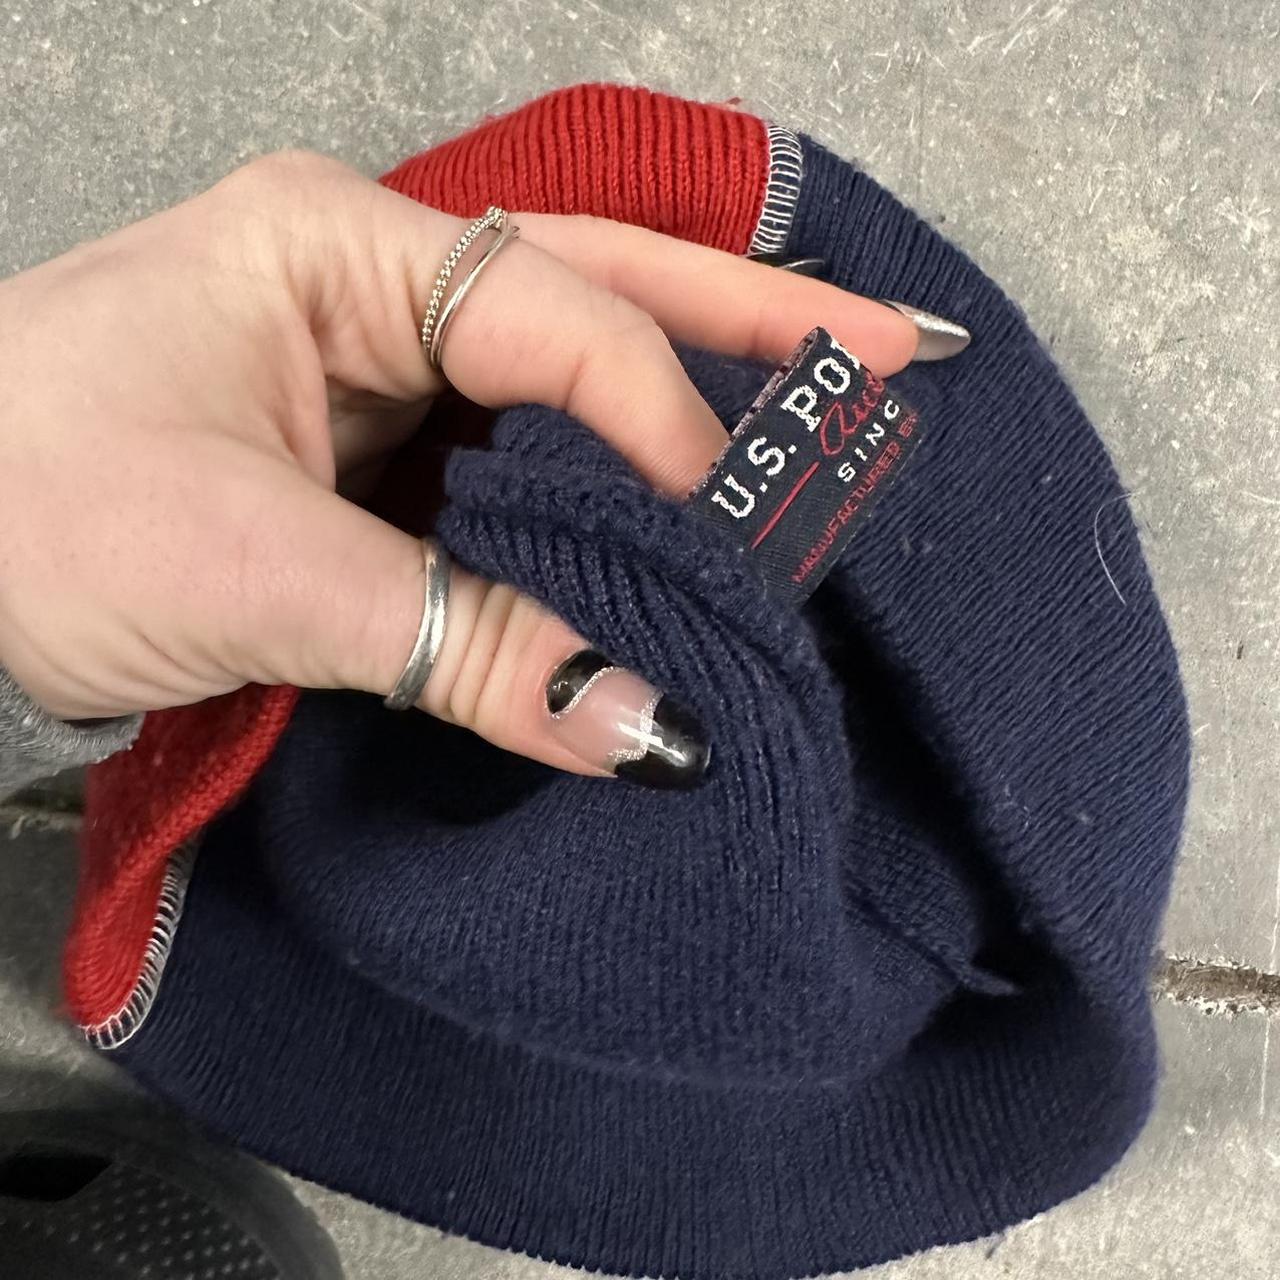 U.S. Polo Assn. Men's Navy and Red Hat (3)